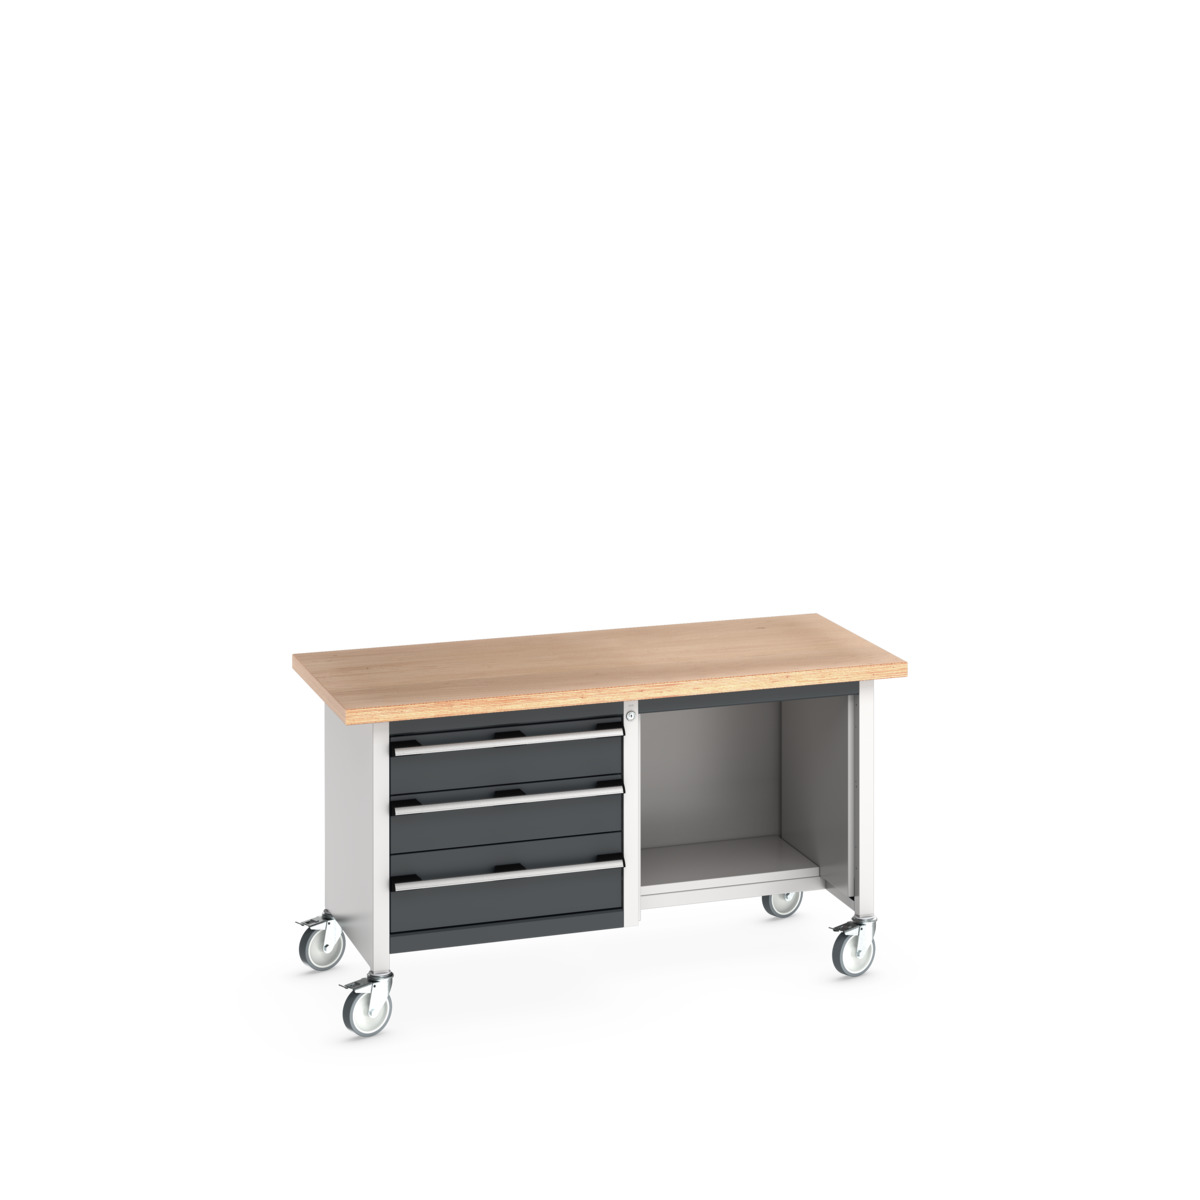 41002115.19V - cubio mobile storage bench (mpx)